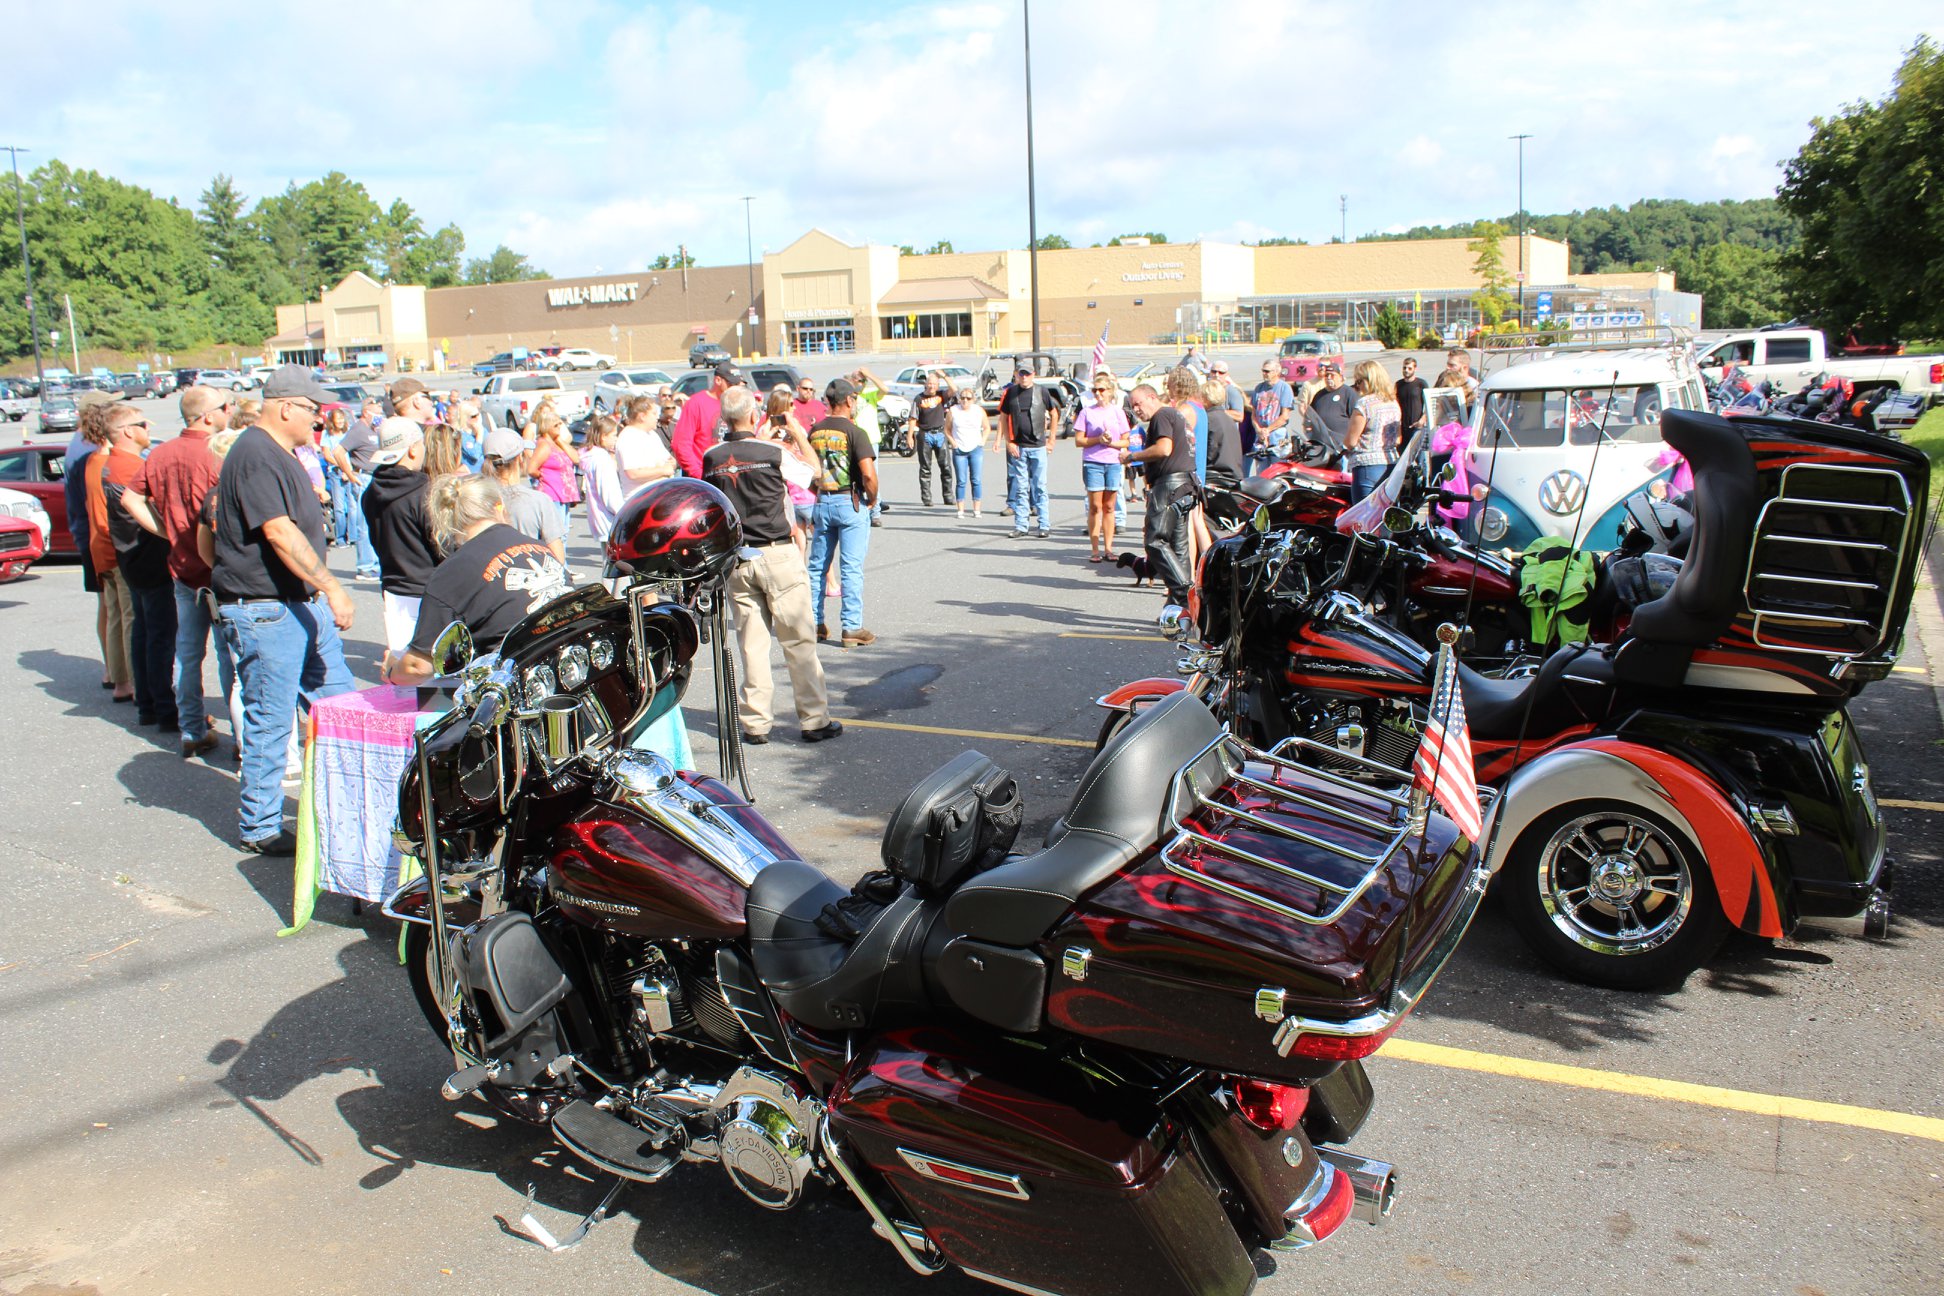 The participants of the second annual Maggie’s Ride gather around and hear a short speech from Amy Young before starting their engines and leaving as a collective unit. (MNJ photo/Cory Spiers)